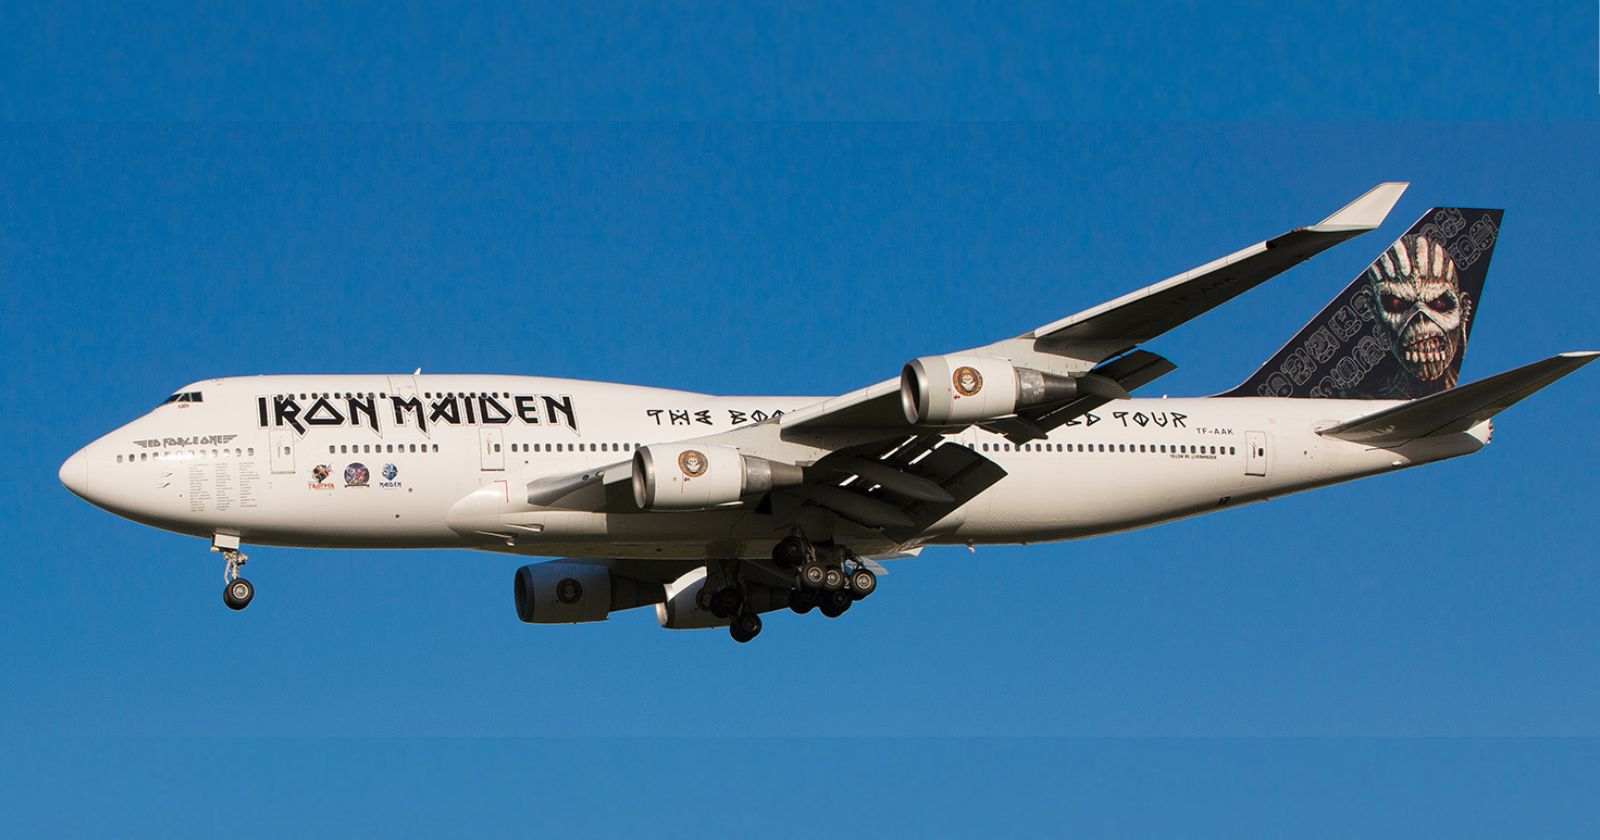 Iron Maiden airplane ed force one